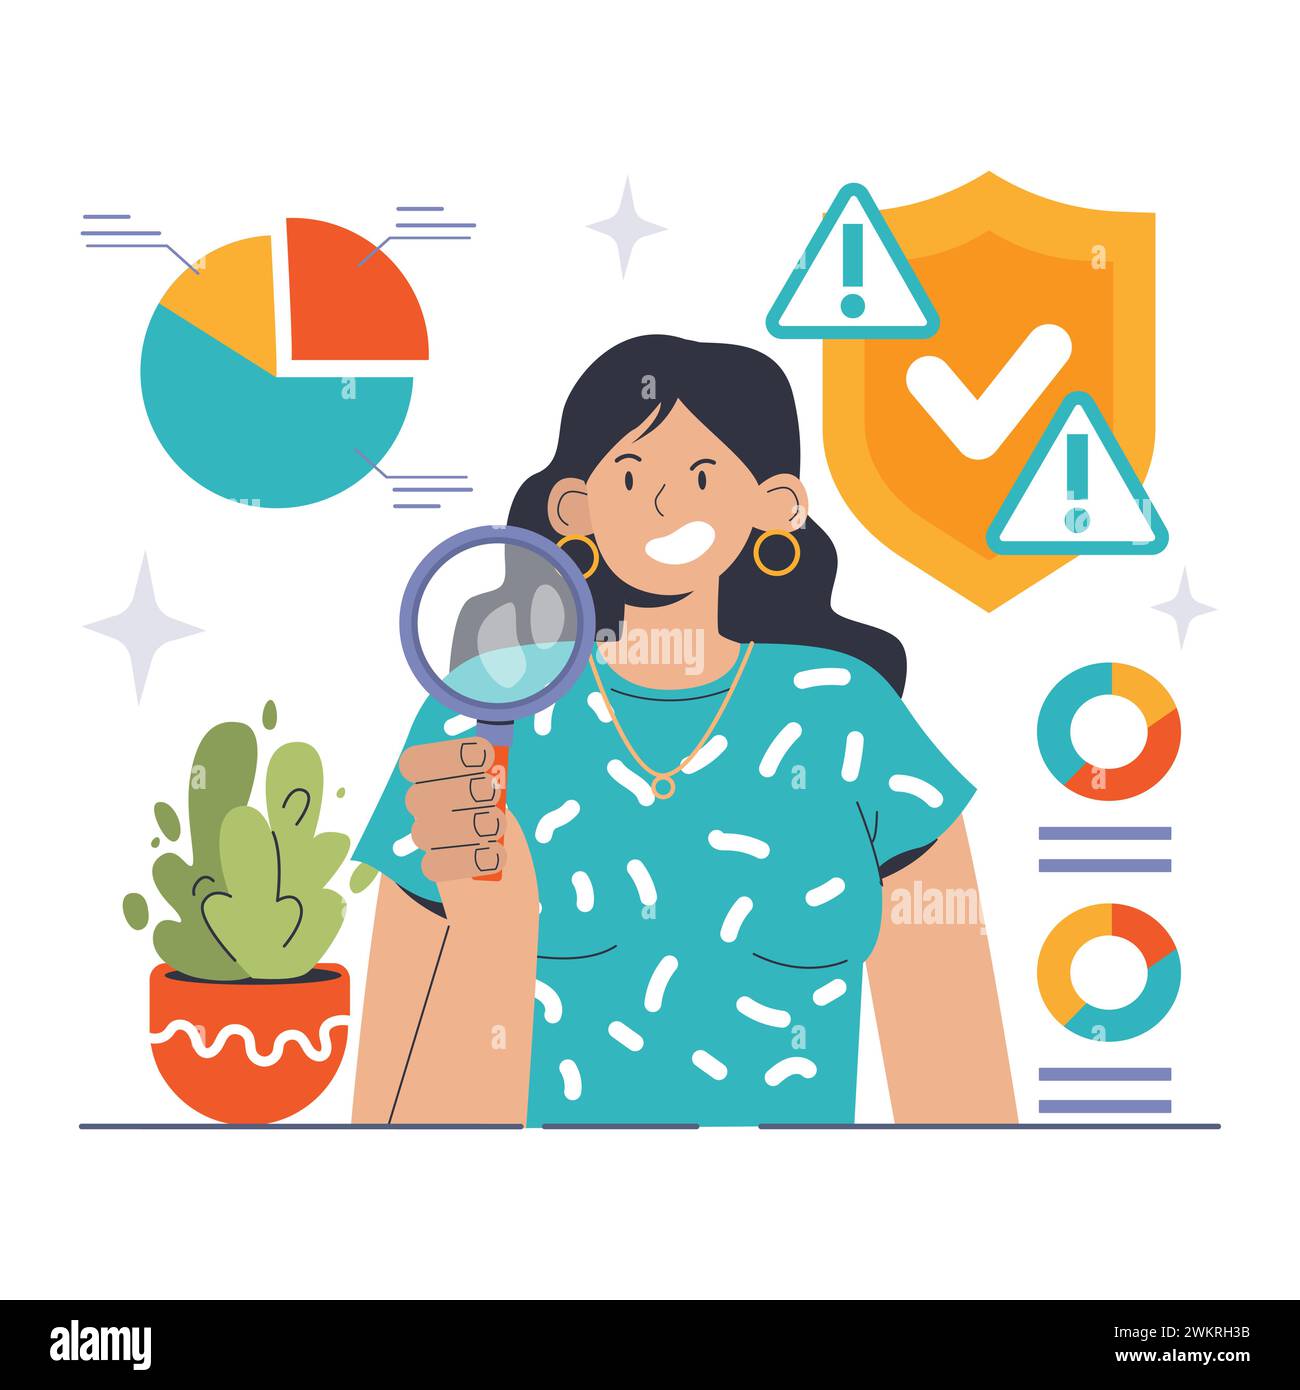 Risk Assessment concept. Expert woman with magnifying glass evaluates data, alongside symbols of caution and security shield. Highlighting potential hazards and safety protocols. vector illustration Stock Vector